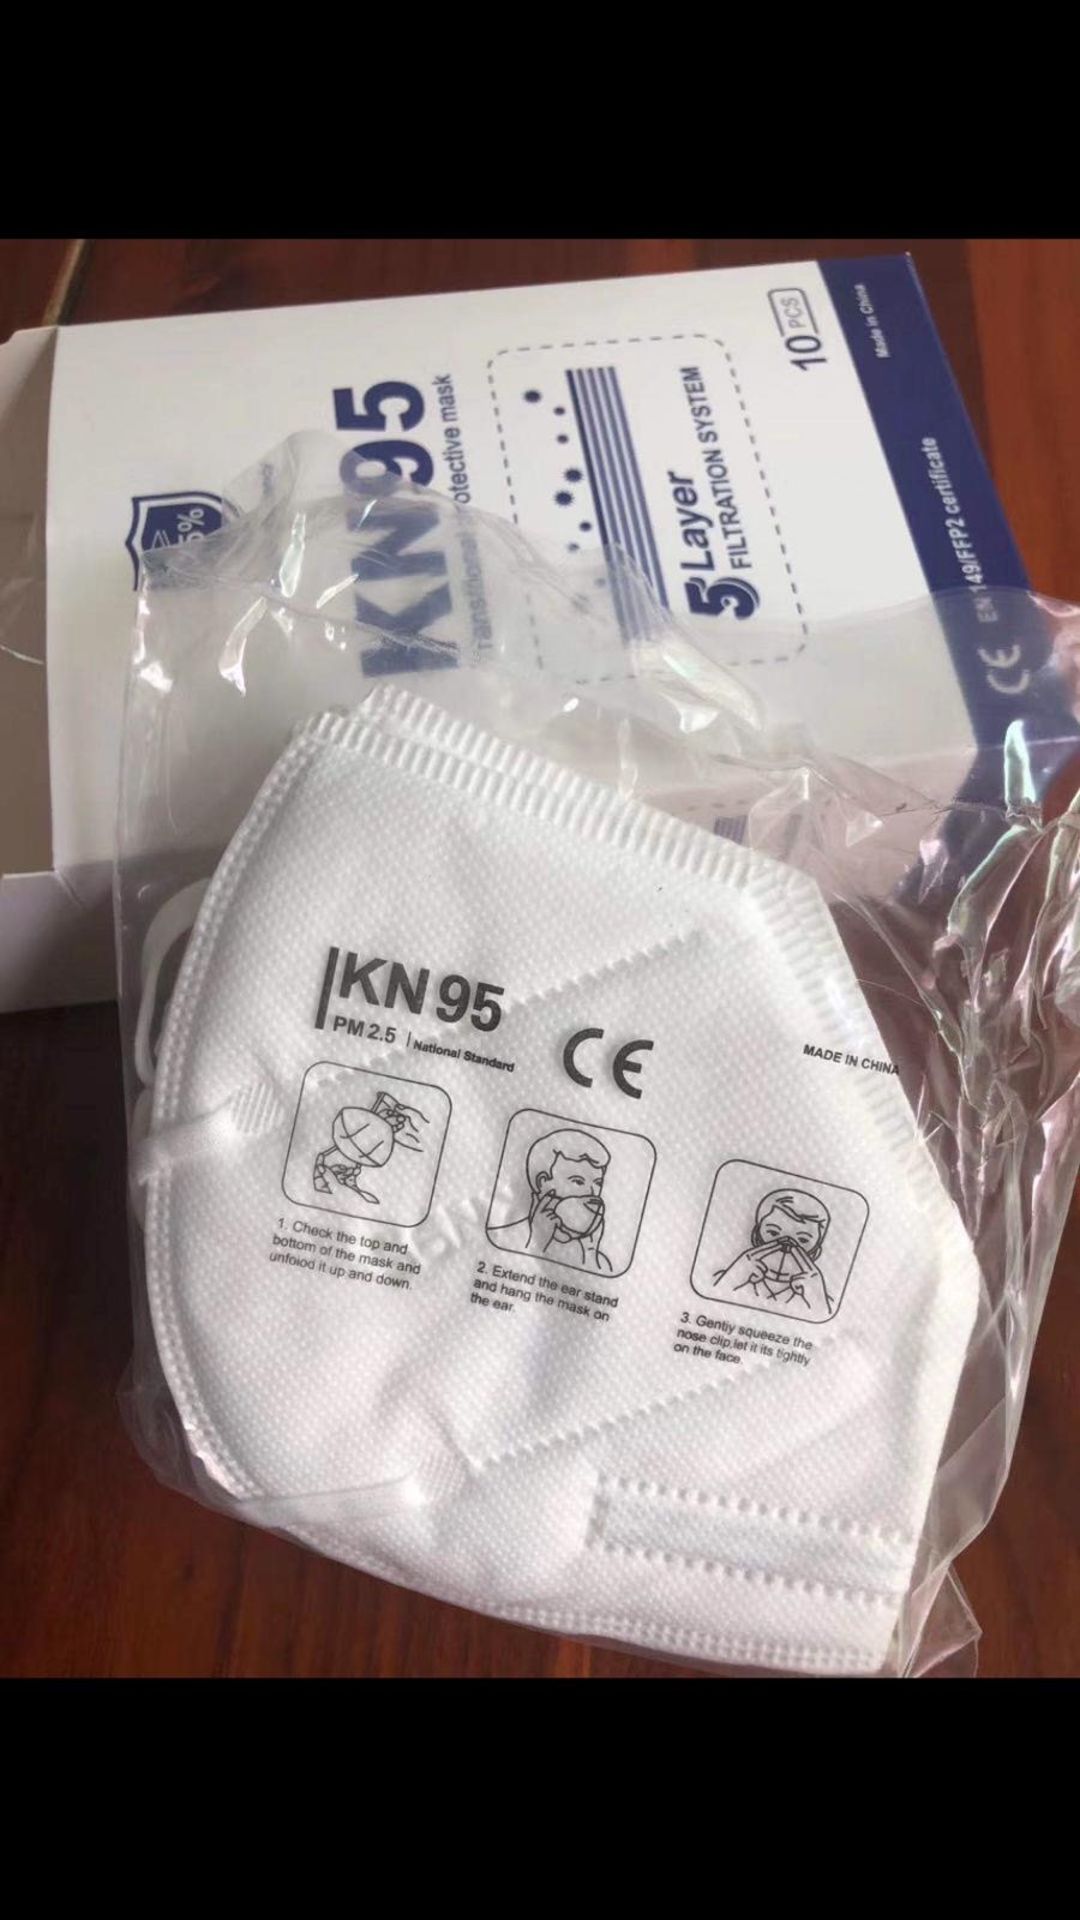 brand new 100pcs boxed kn95 face masks - Image 4 of 4